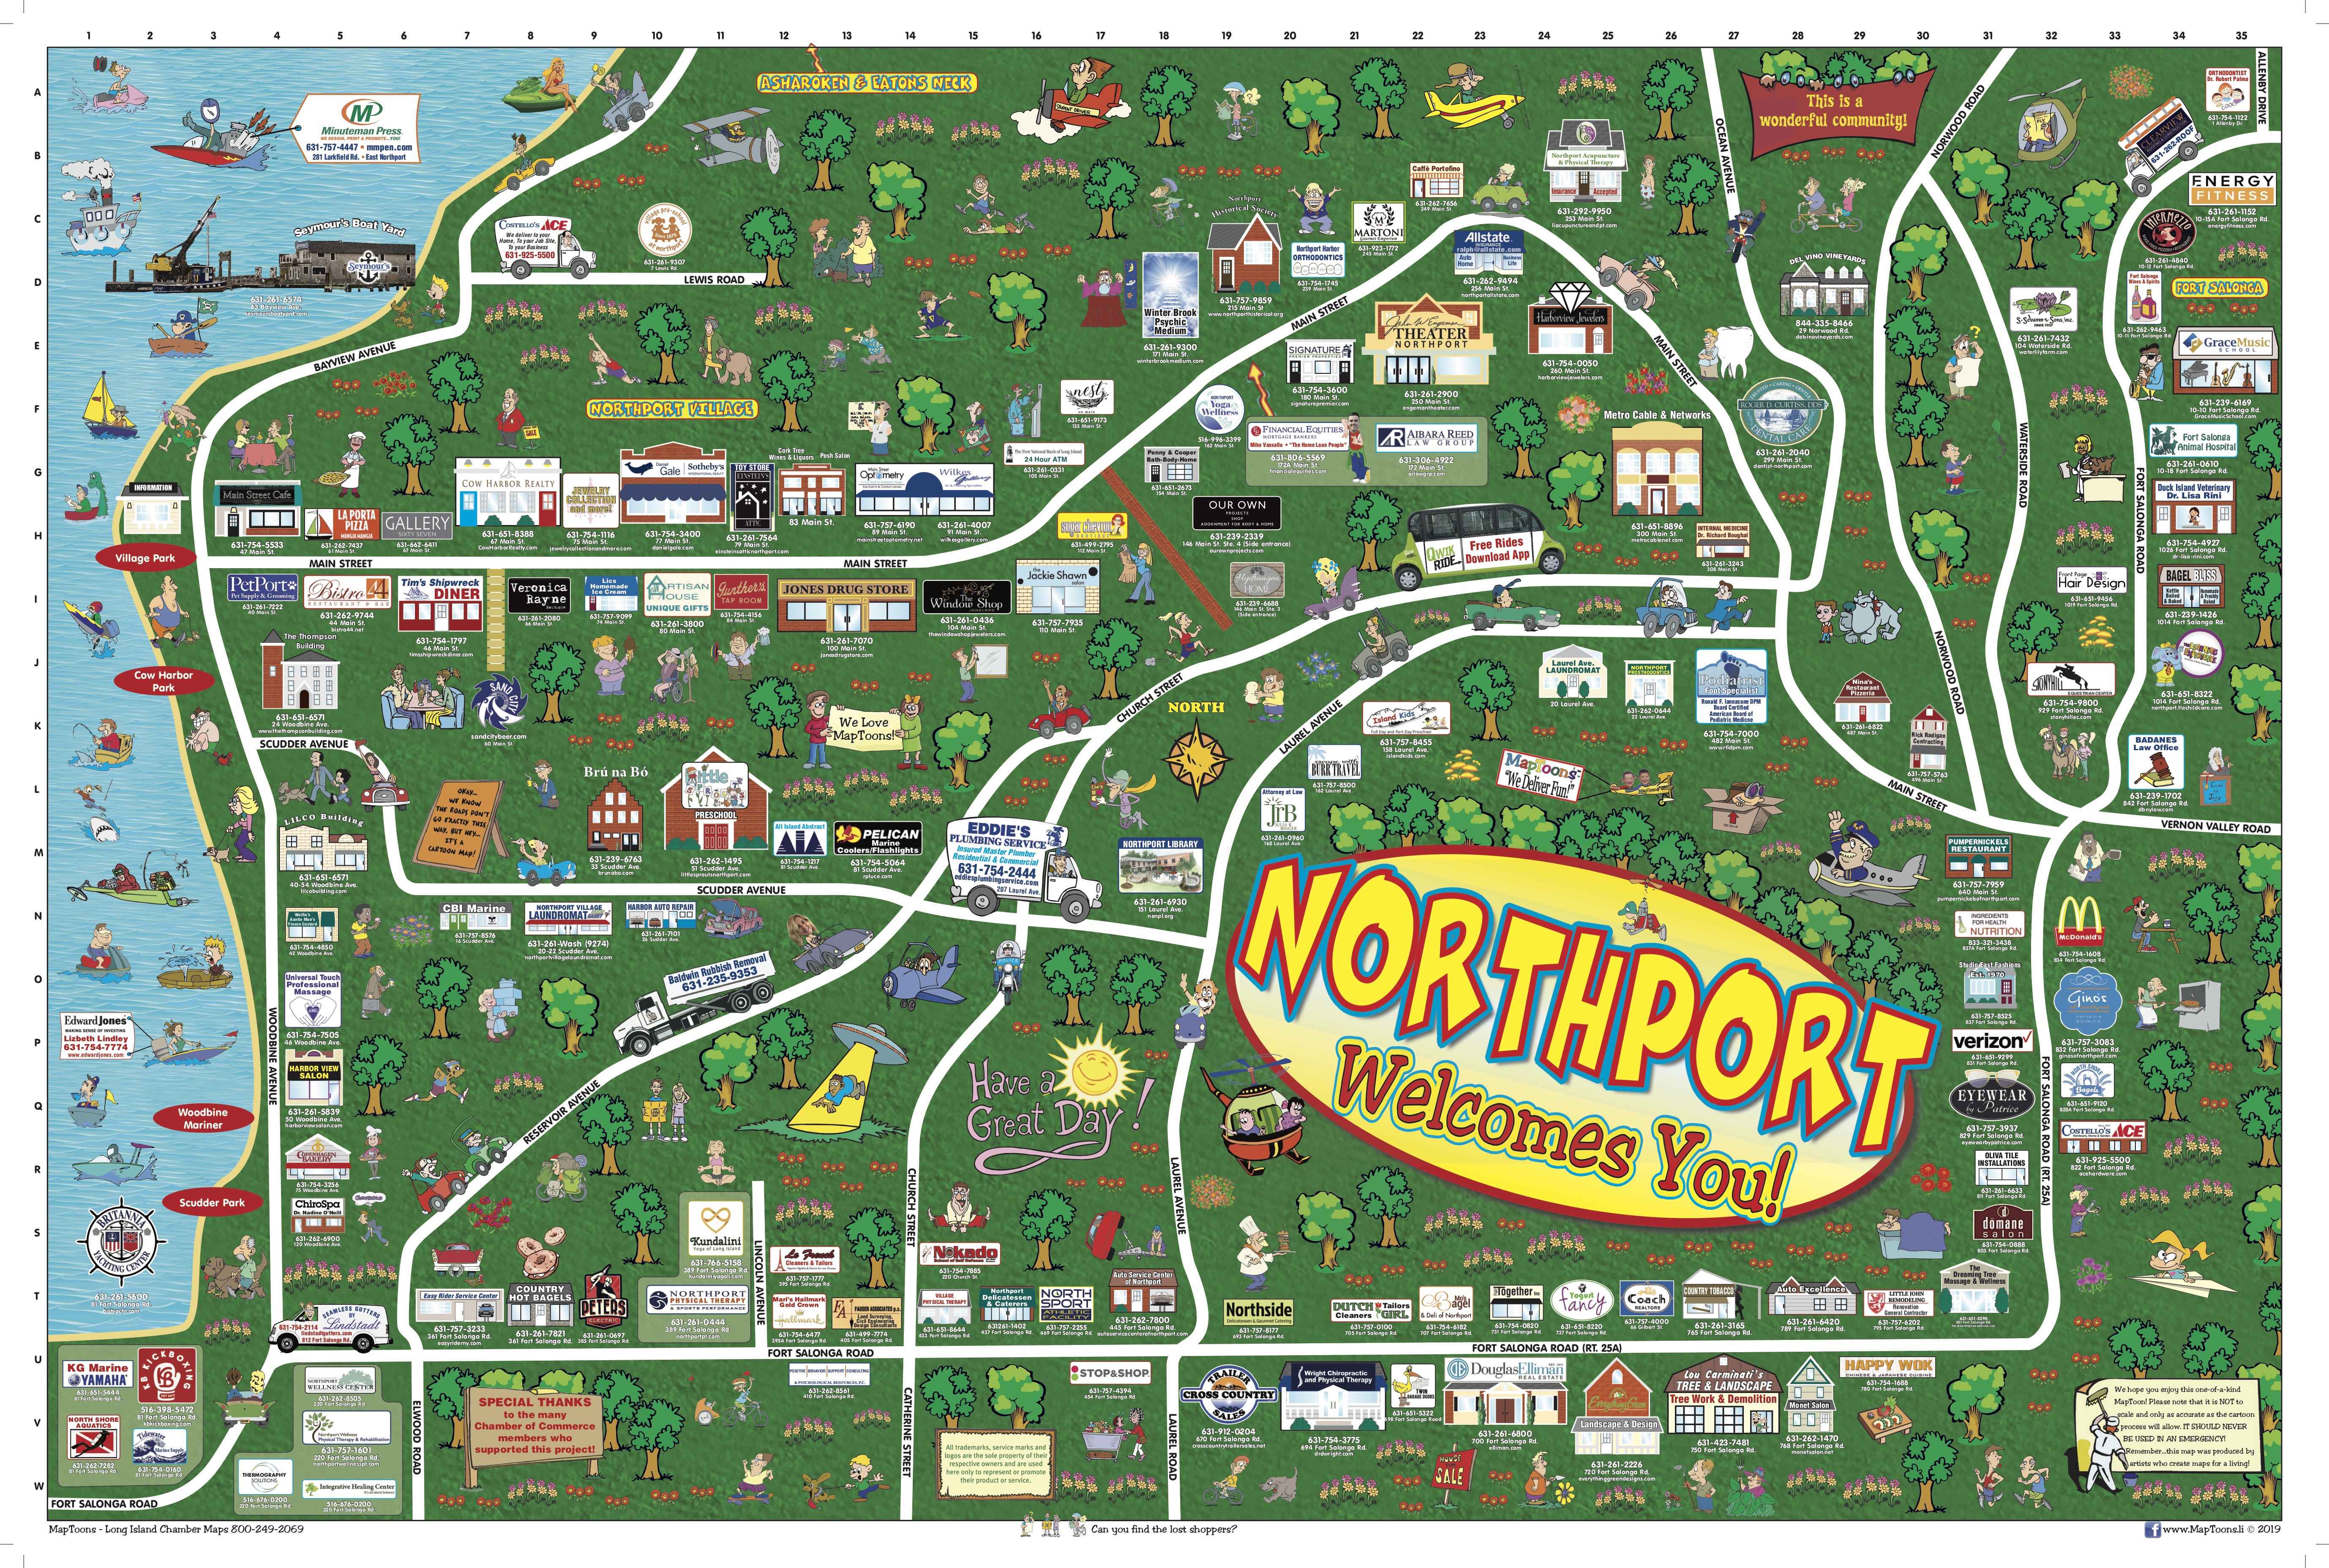 Northport map